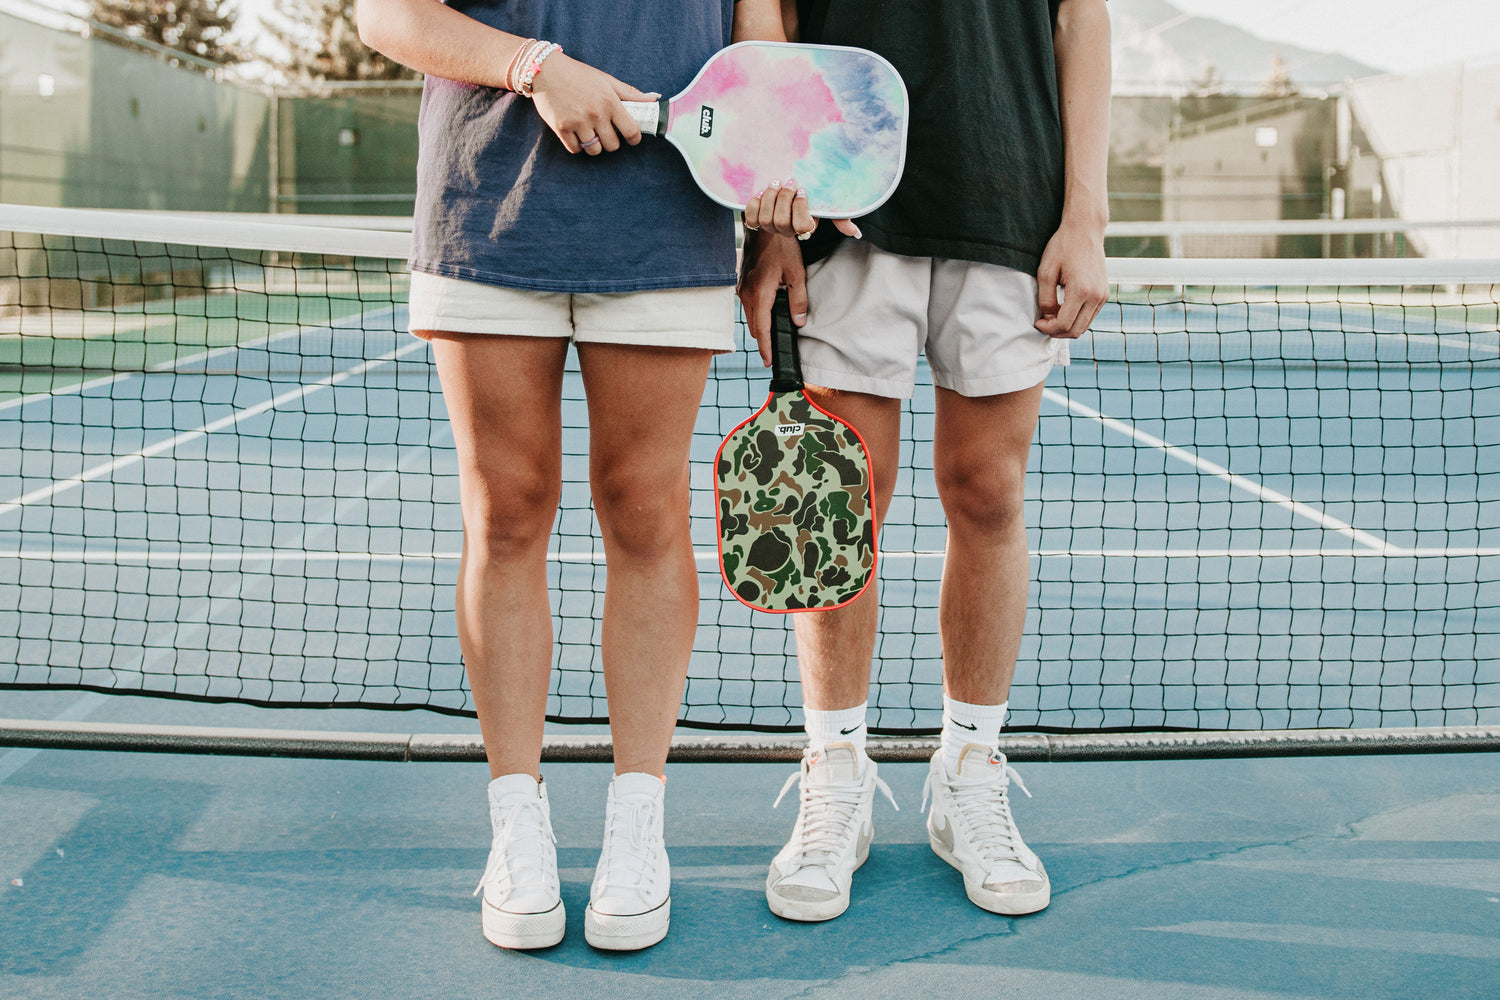 2 people hold pickleball paddles on a pickleball court